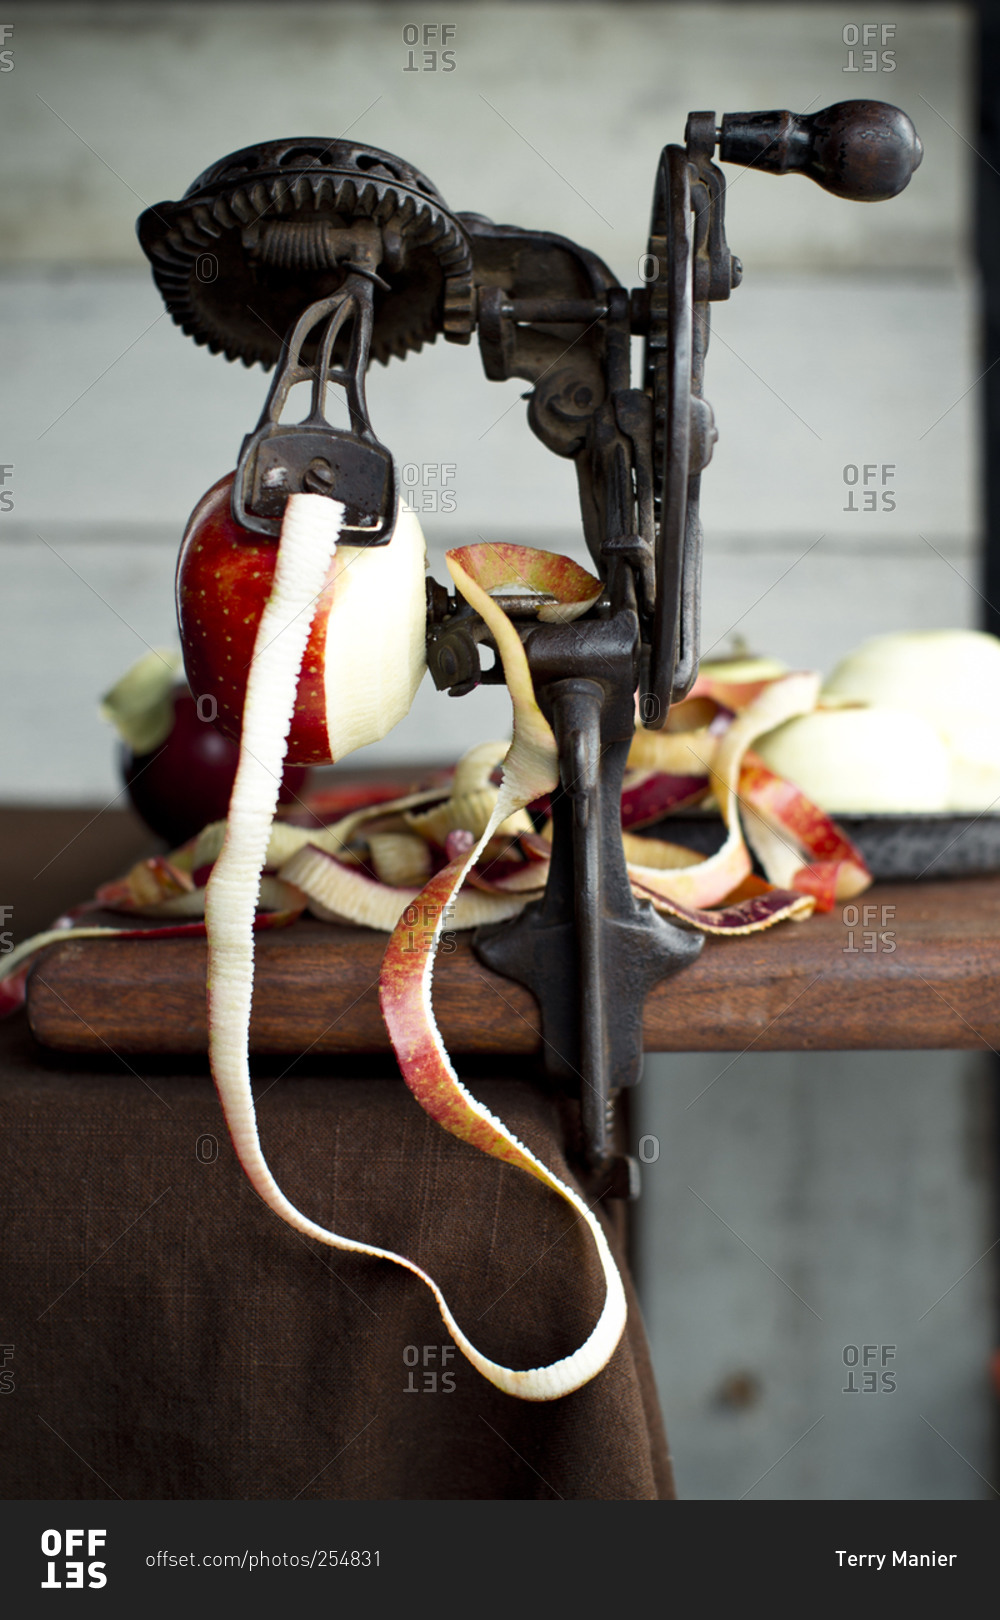 This Old-Fashioned Apple Peeler Is the Best Way to Peel Apples